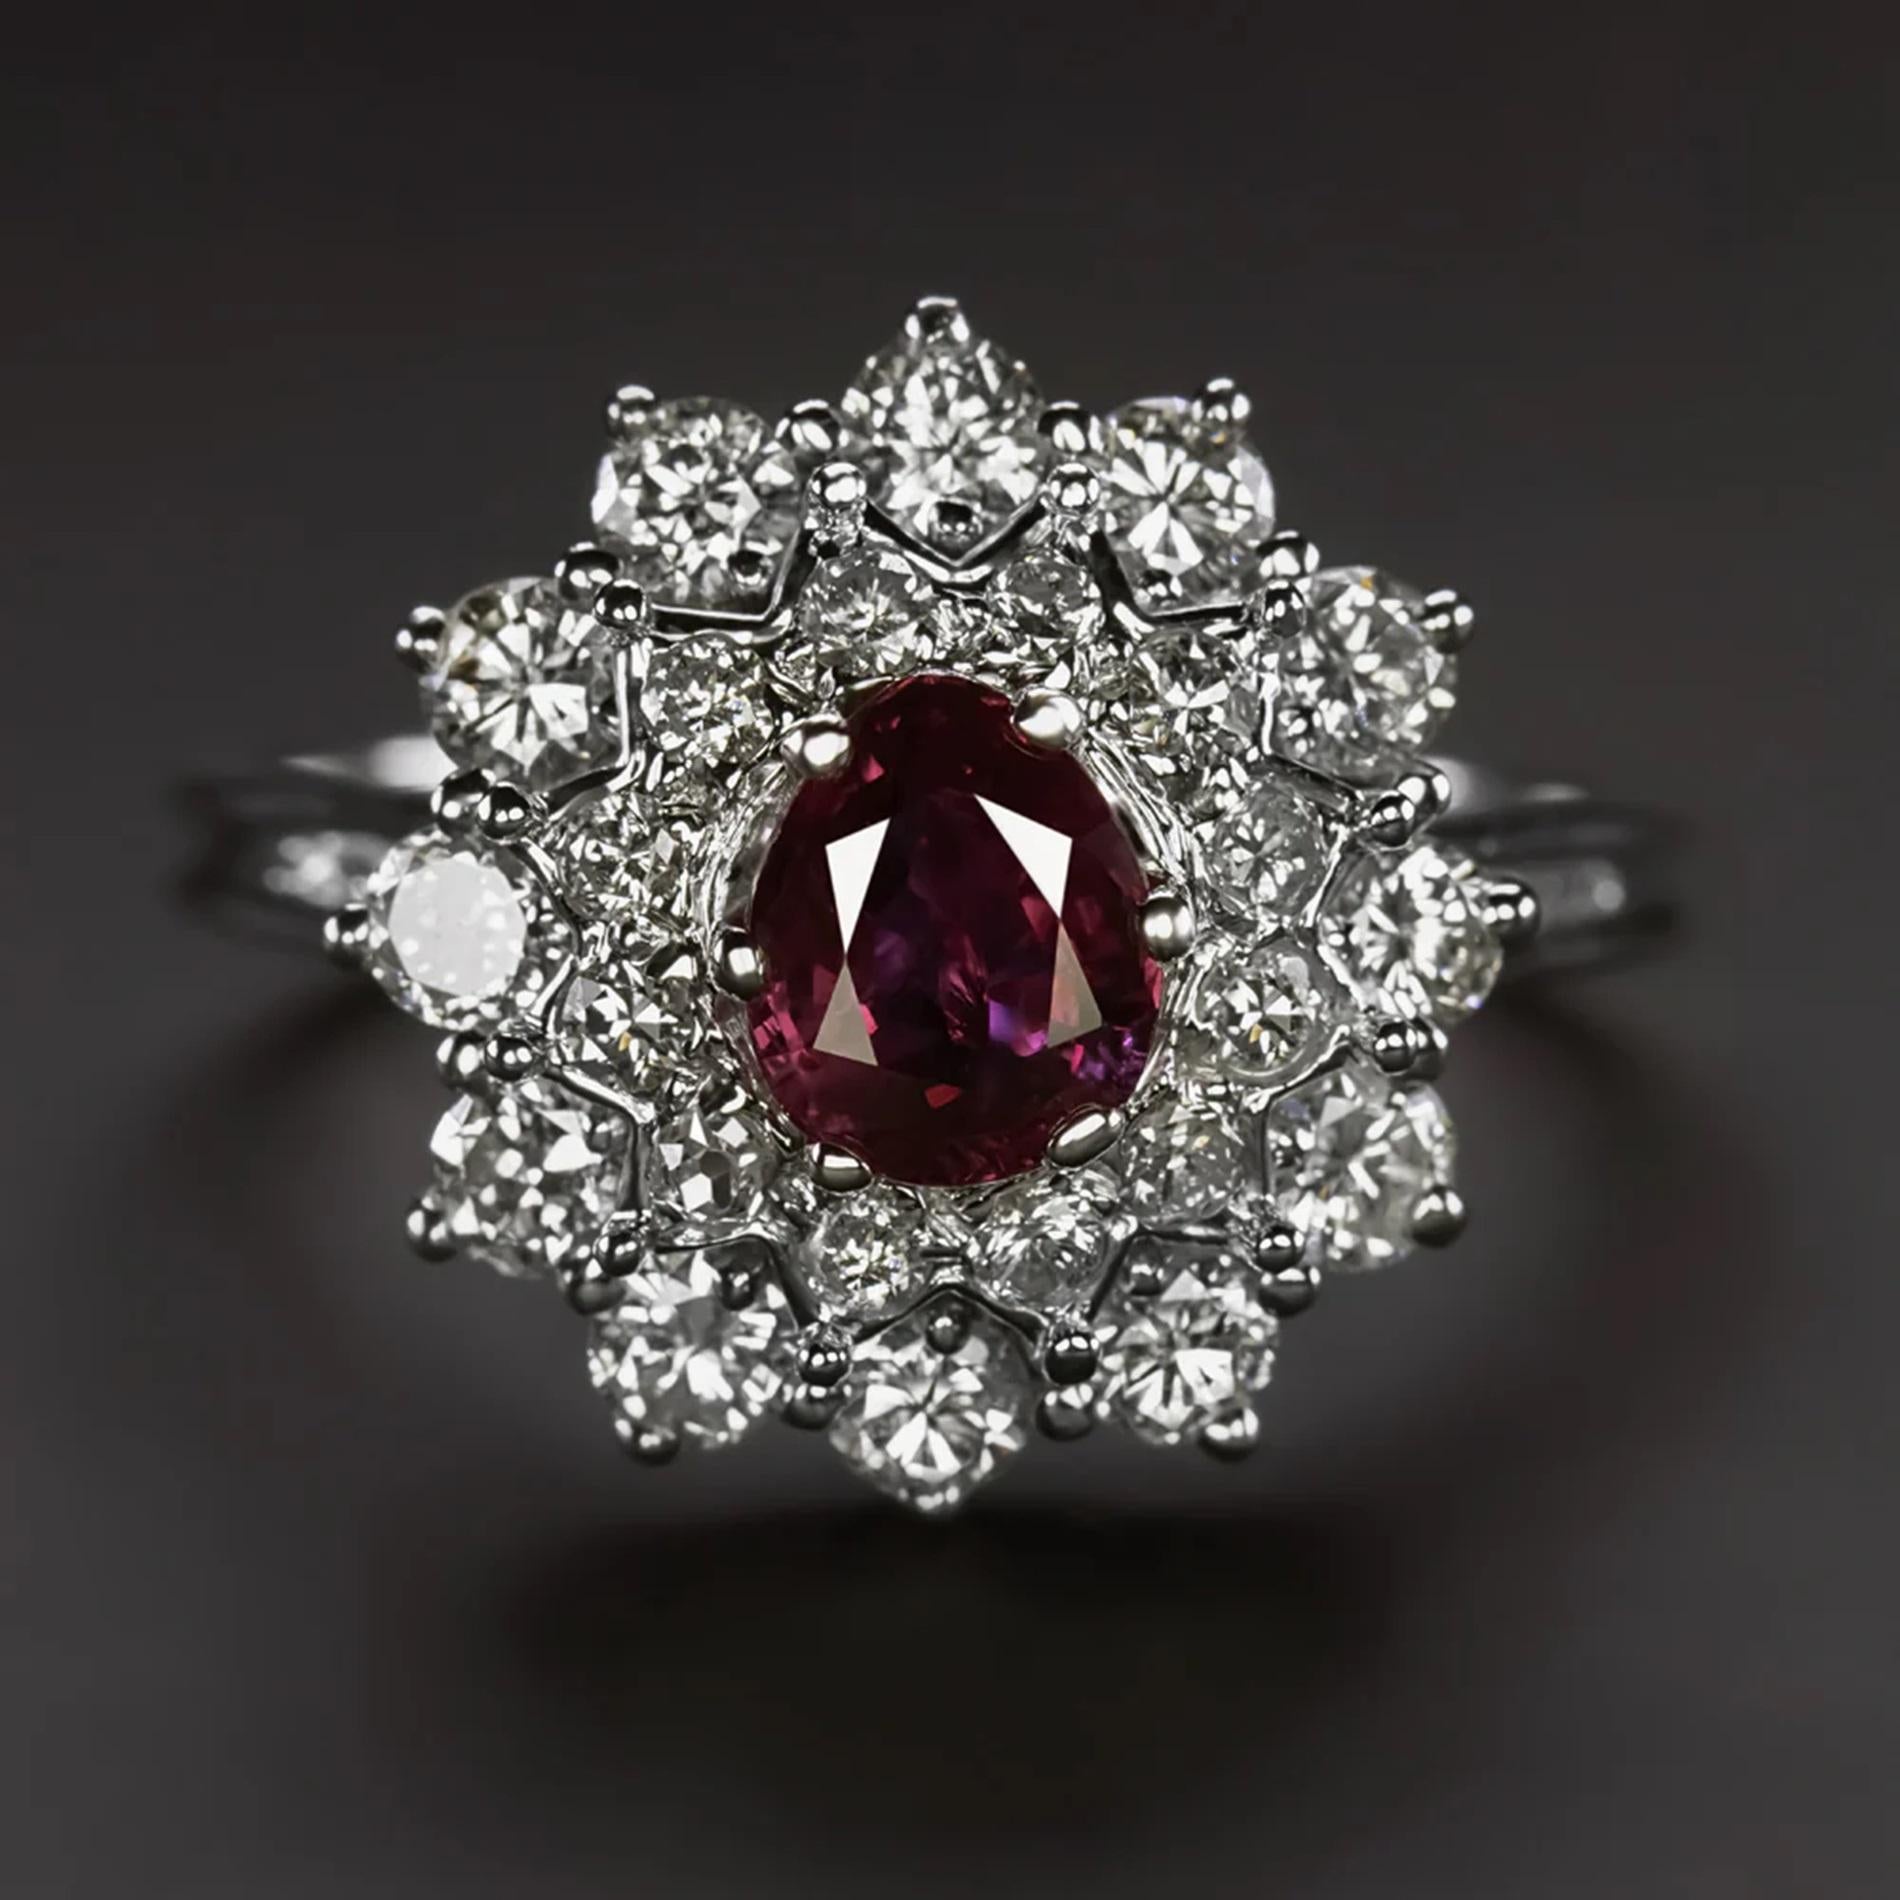 Presenting a mesmerizing ruby and diamond ring that captivates with its stunning design, featuring a brilliant pear-shaped ruby encircled by a vibrant double halo of diamonds. This exquisite piece commands attention with its large and eye-catching